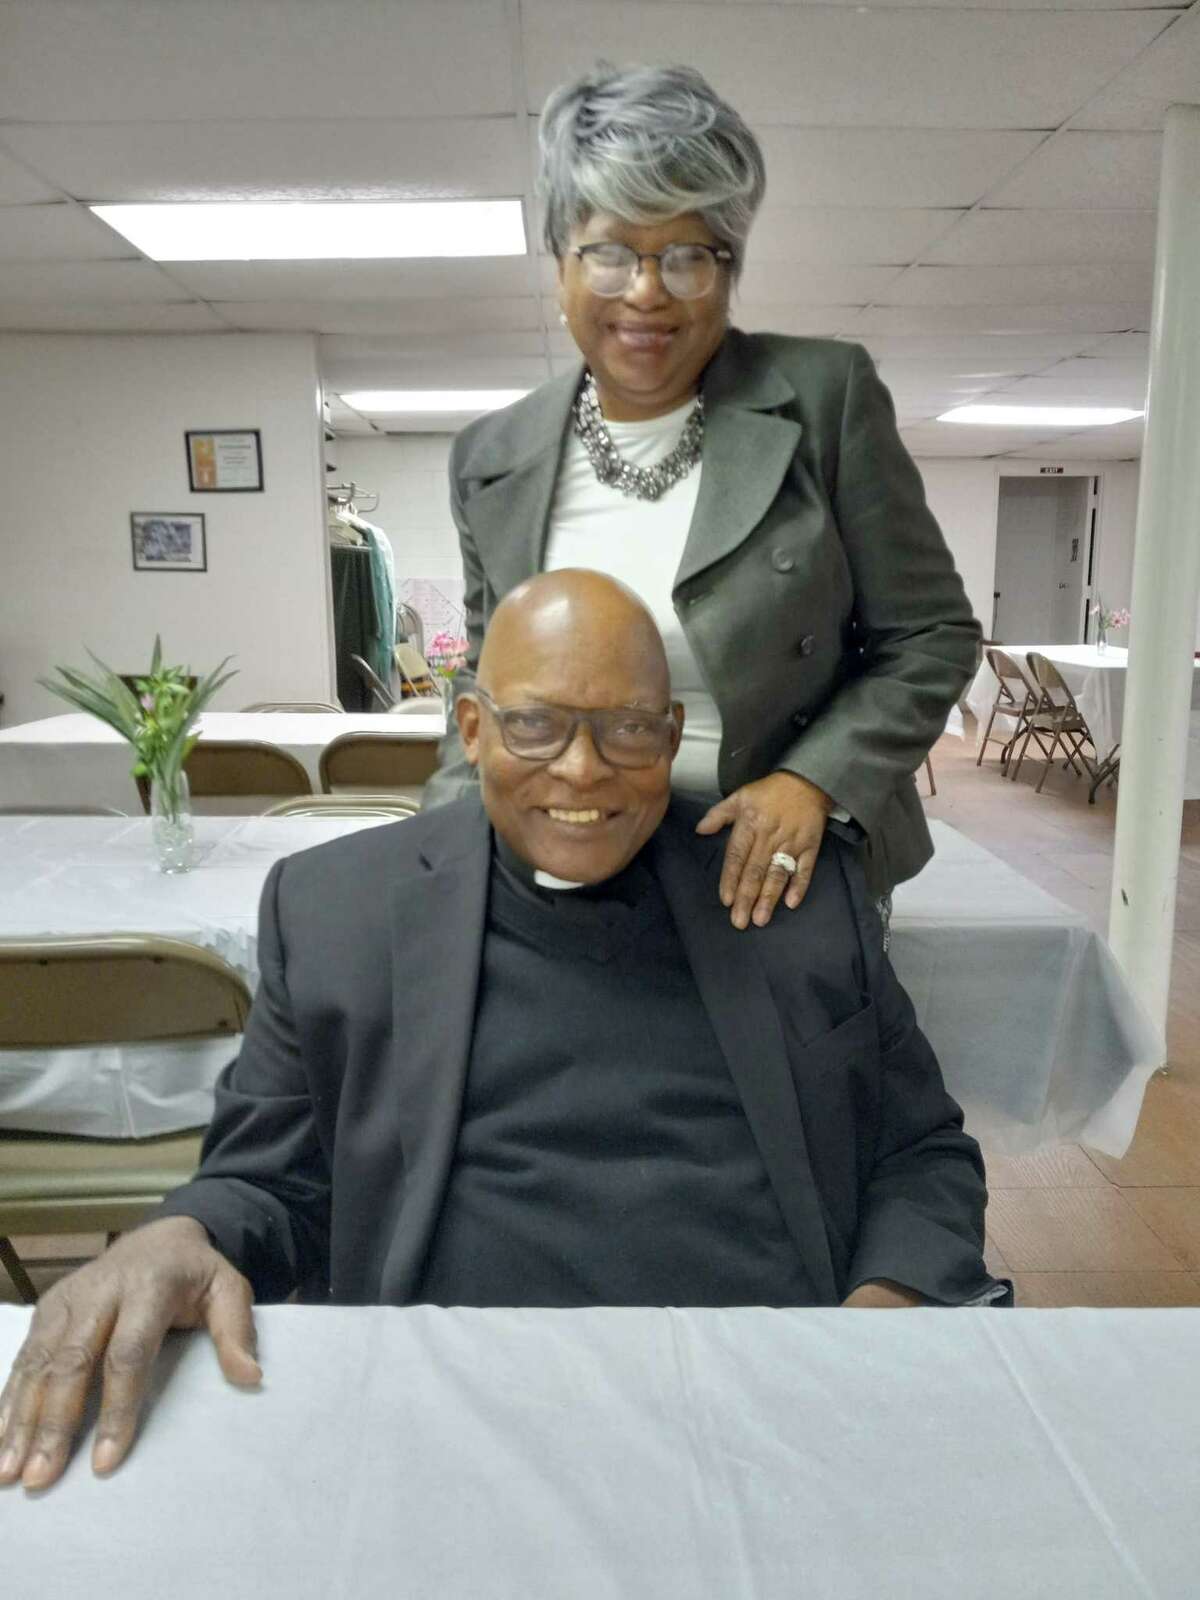 Angaza Mwando, pictured with his wife, Effie, recently became an ordained member of the Workman Memorial AME Zion church in Torrington. Effie Mwando is chairwoman of the church’s evangelism team and another ordained member.